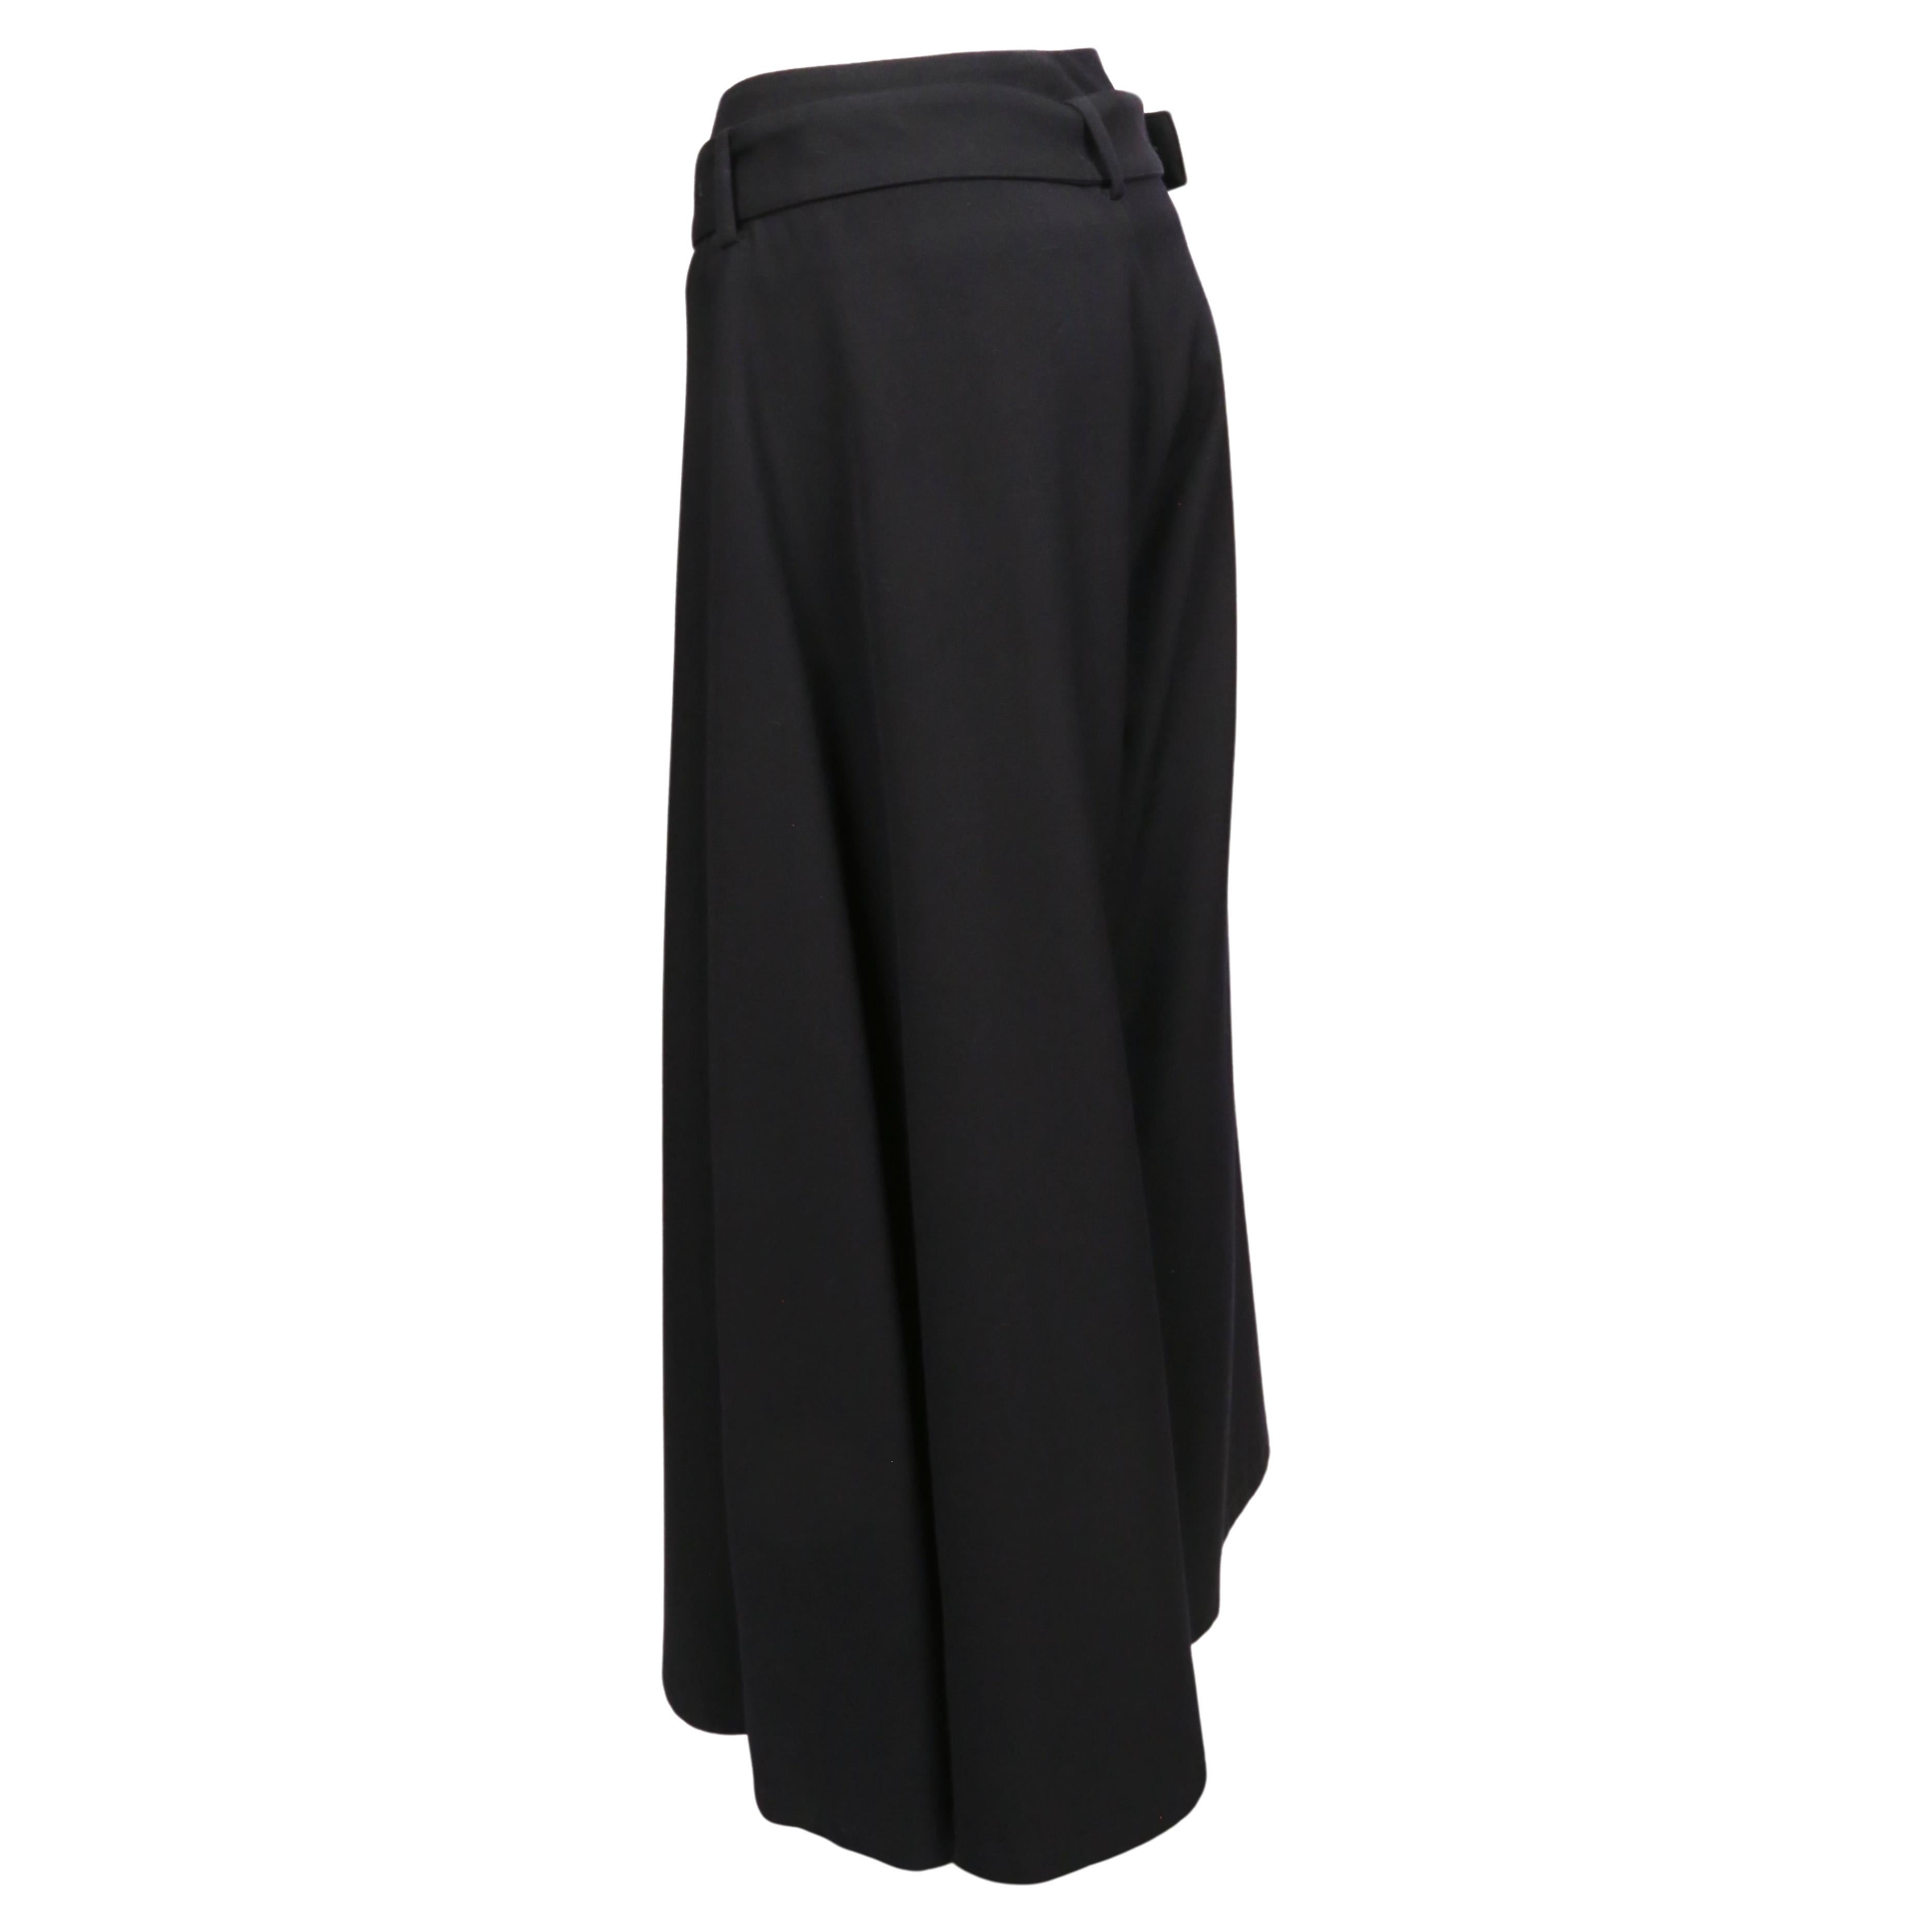 Inky-black, asymmetrical wide leg pants designed by Yohji Yamamoto dating to the 2000's. Japanese size '1'. Approximate measurements: waist 26.5